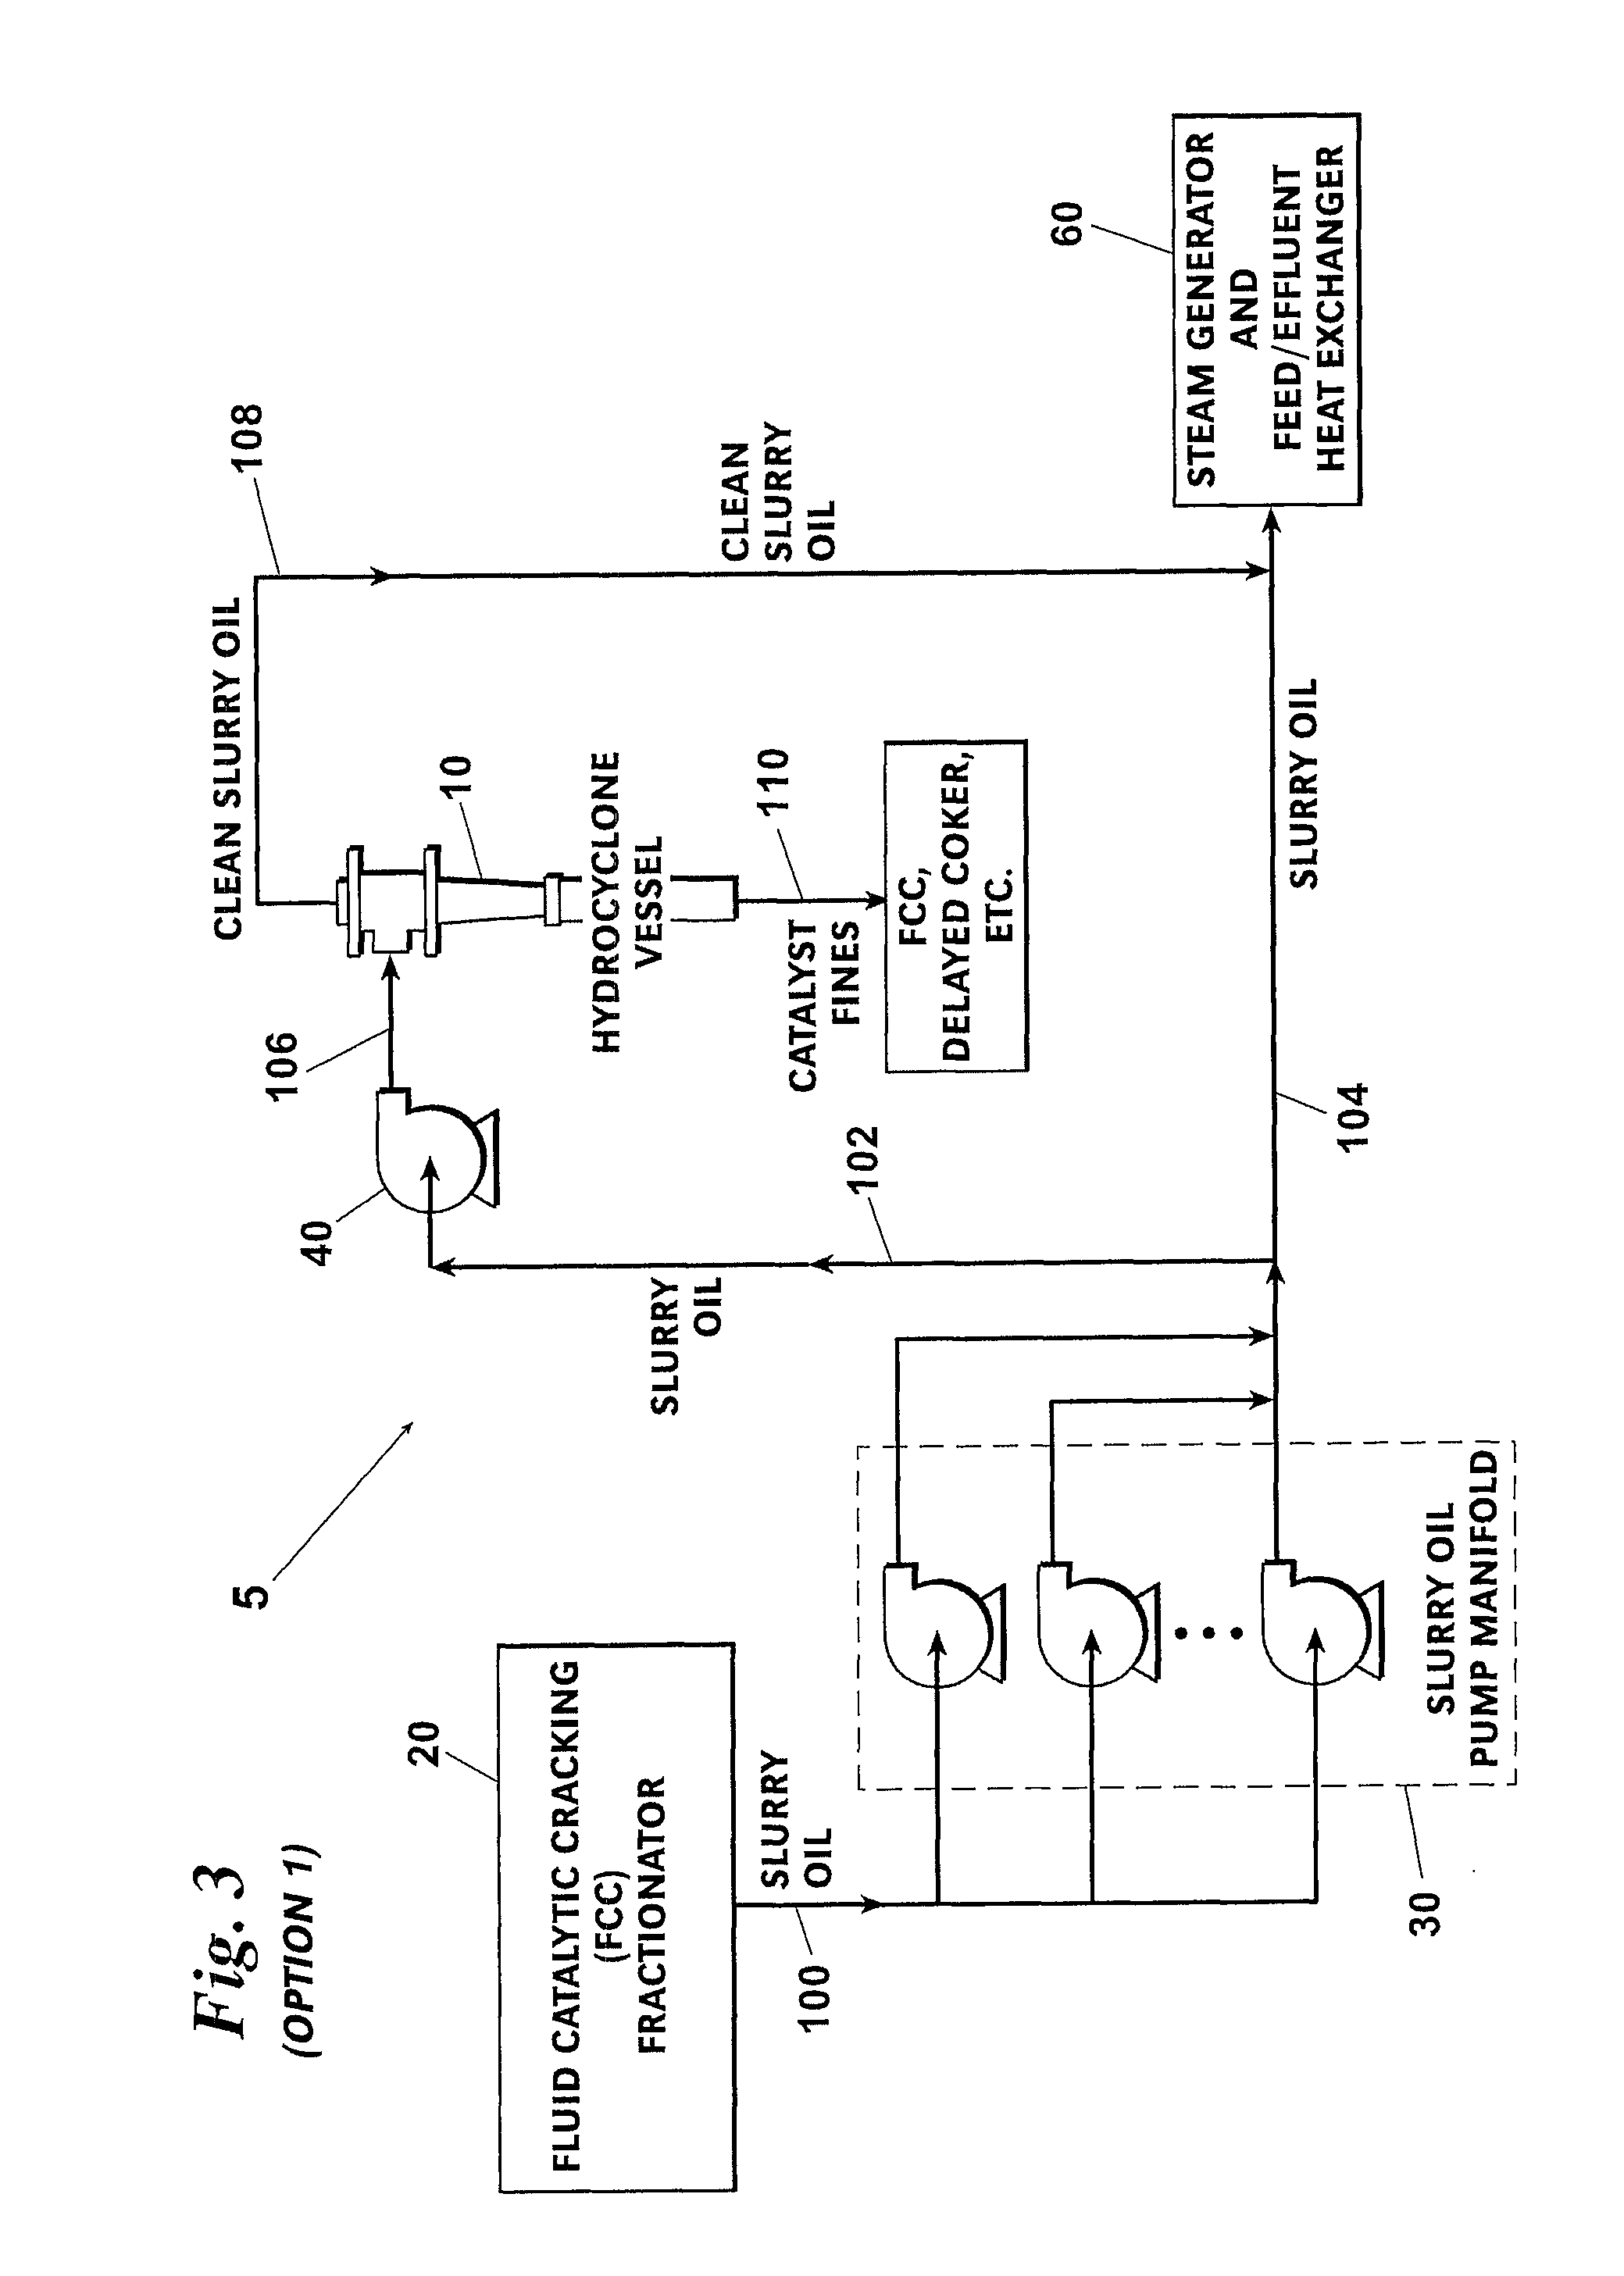 Method for separating entrained catalyst and catalyst fines from slurry oil